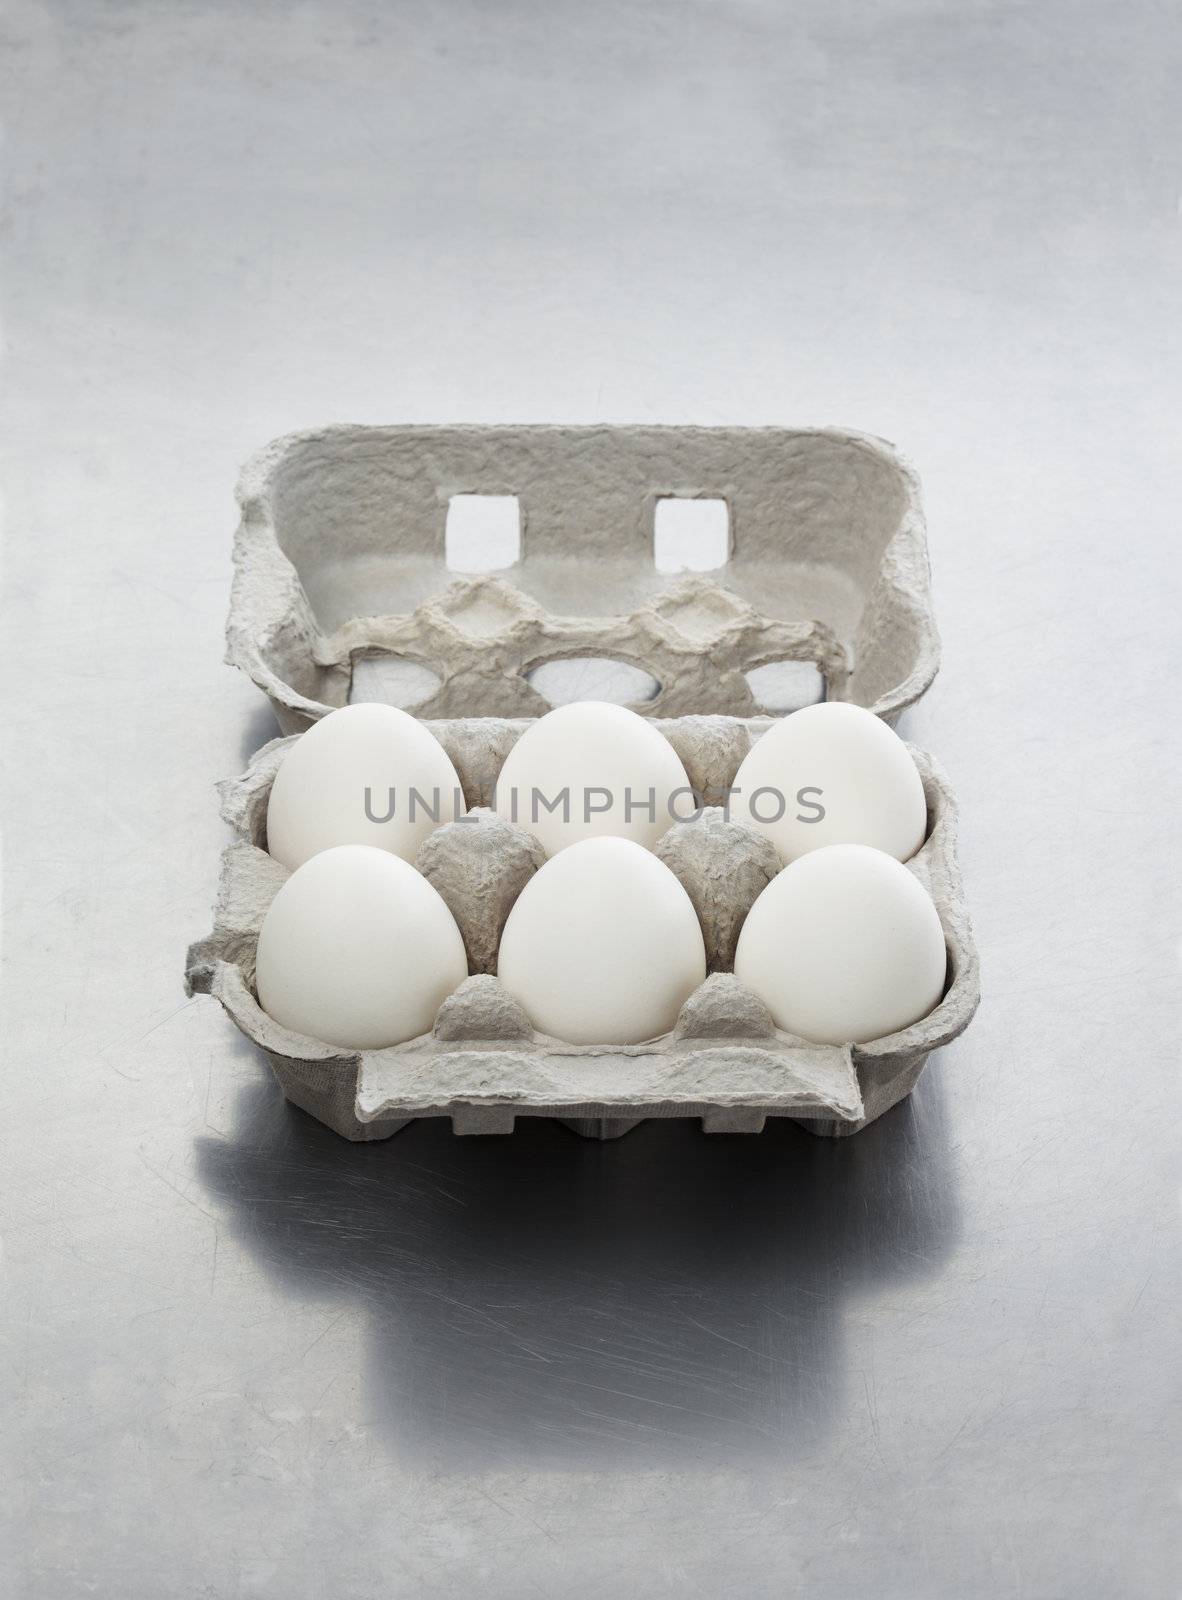 Eggs by Stocksnapper